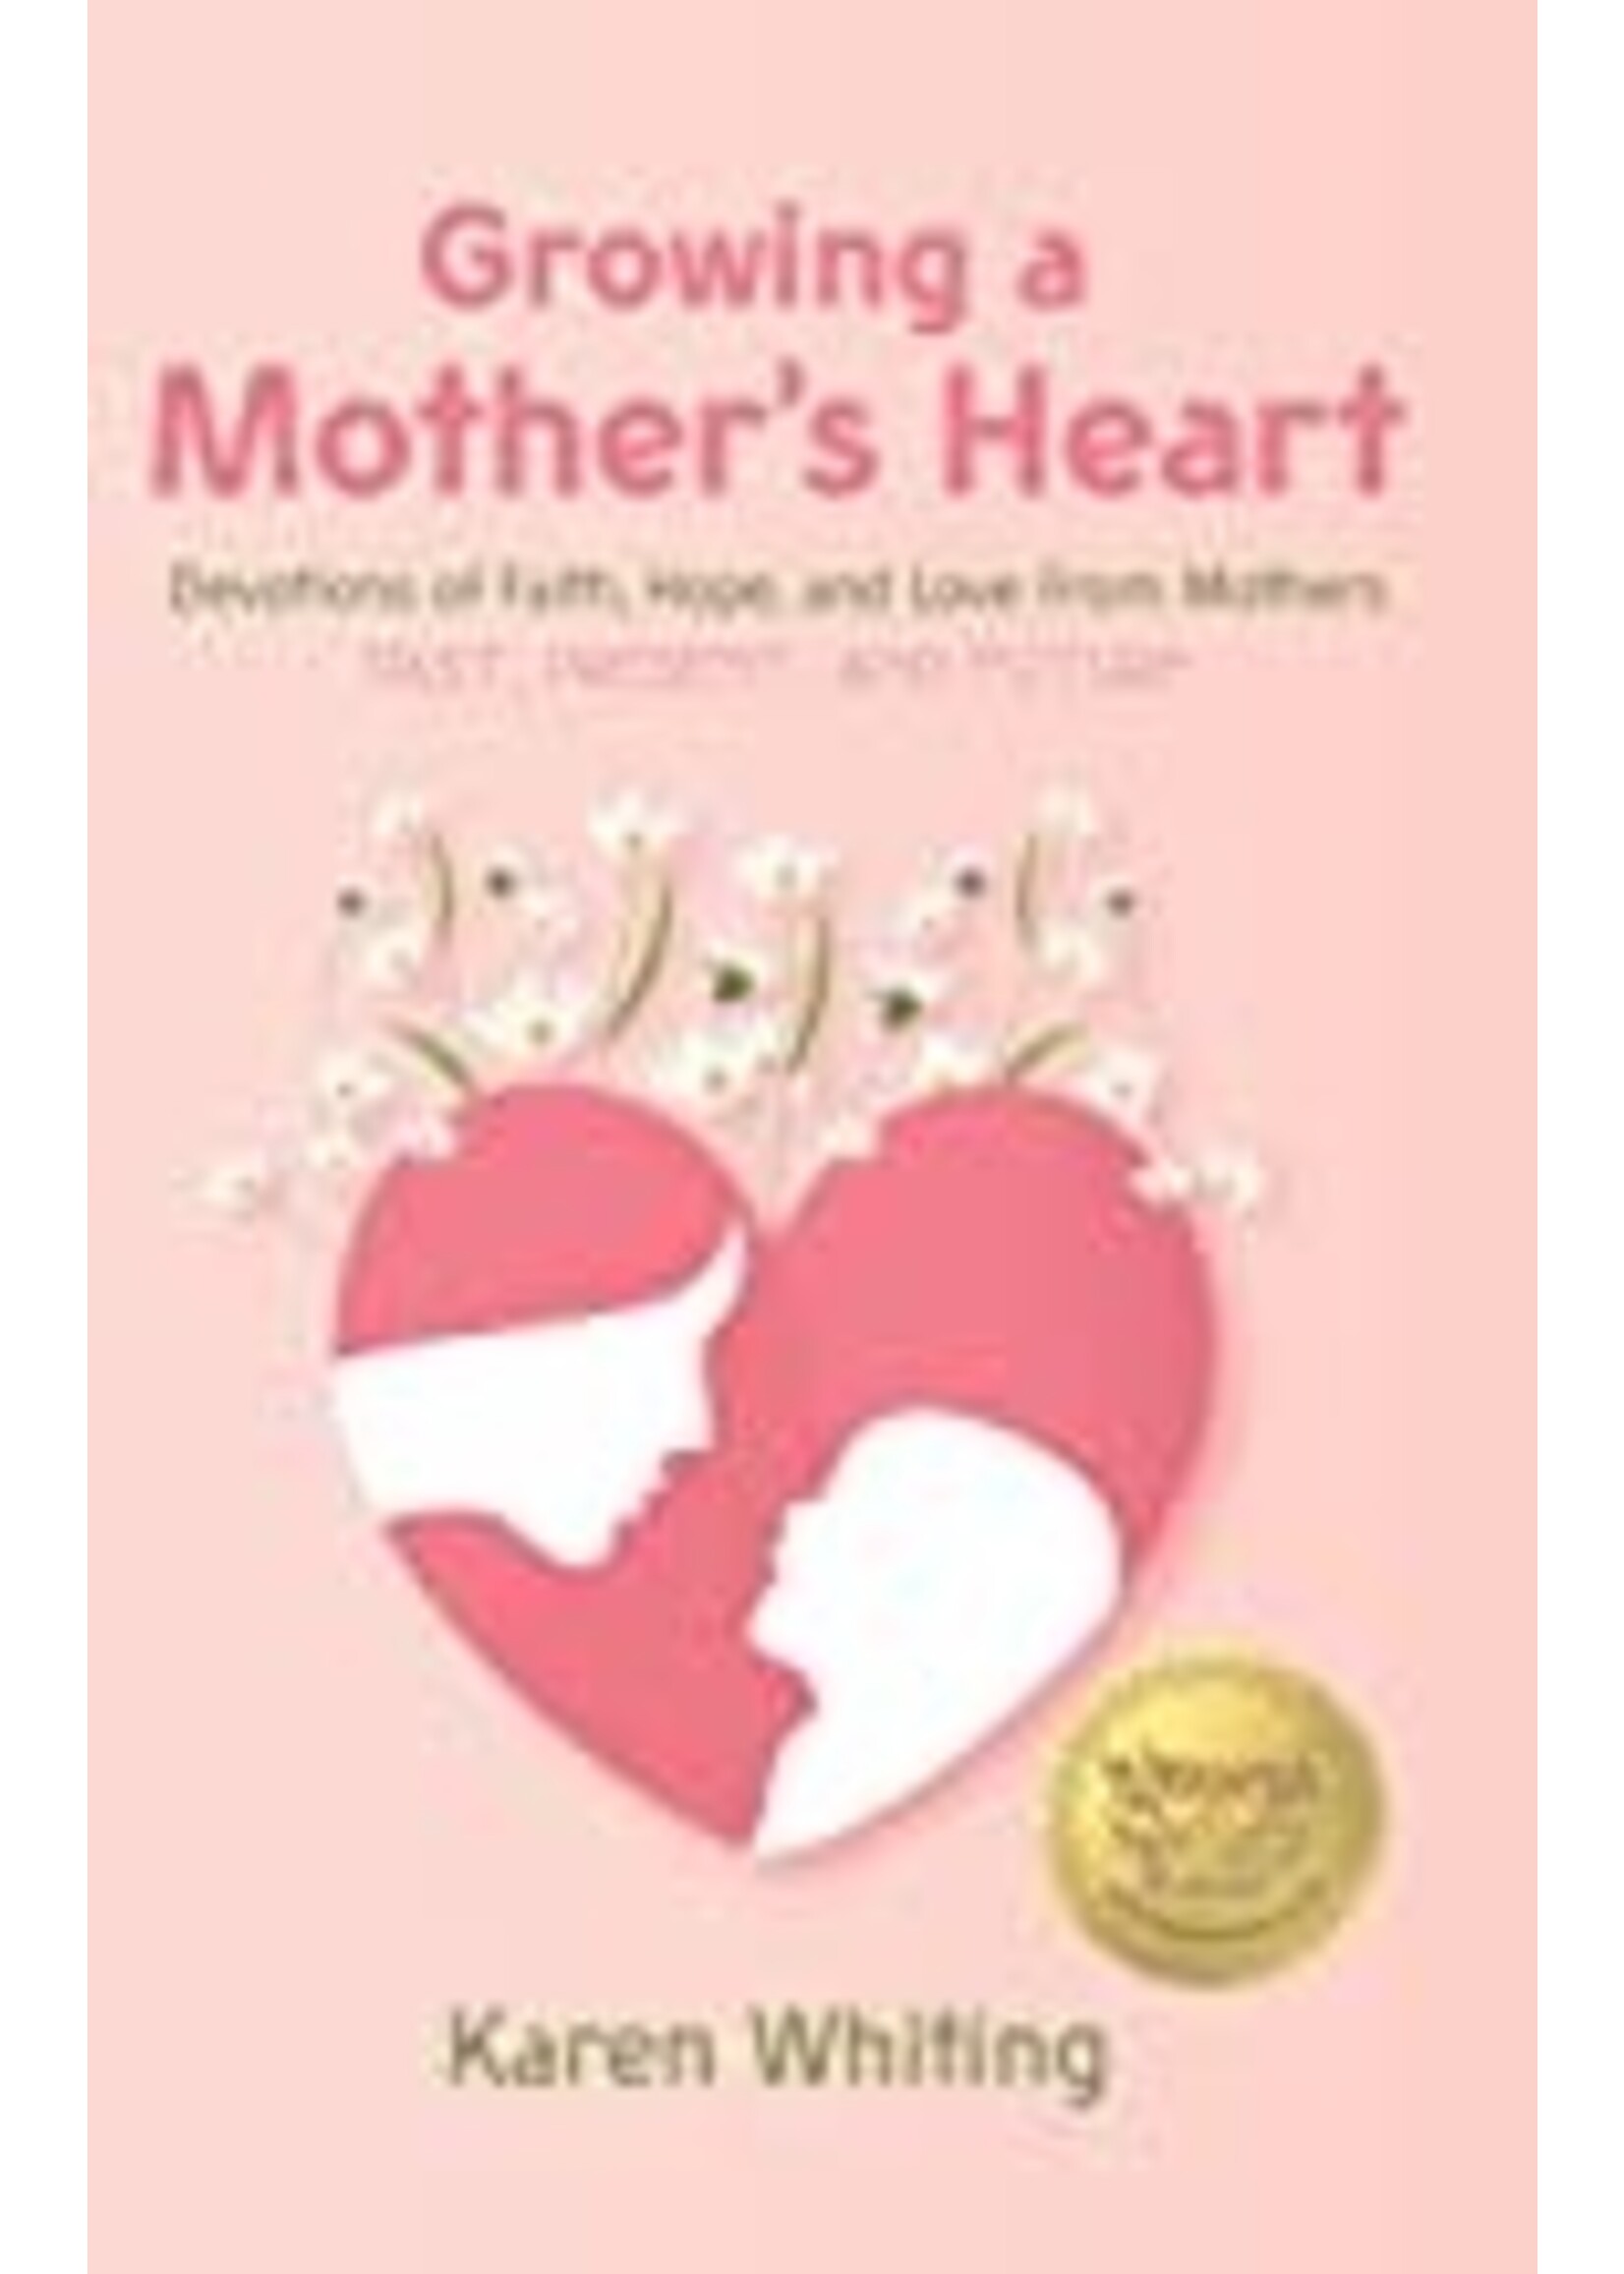 GROWING A MOTHERS HEART